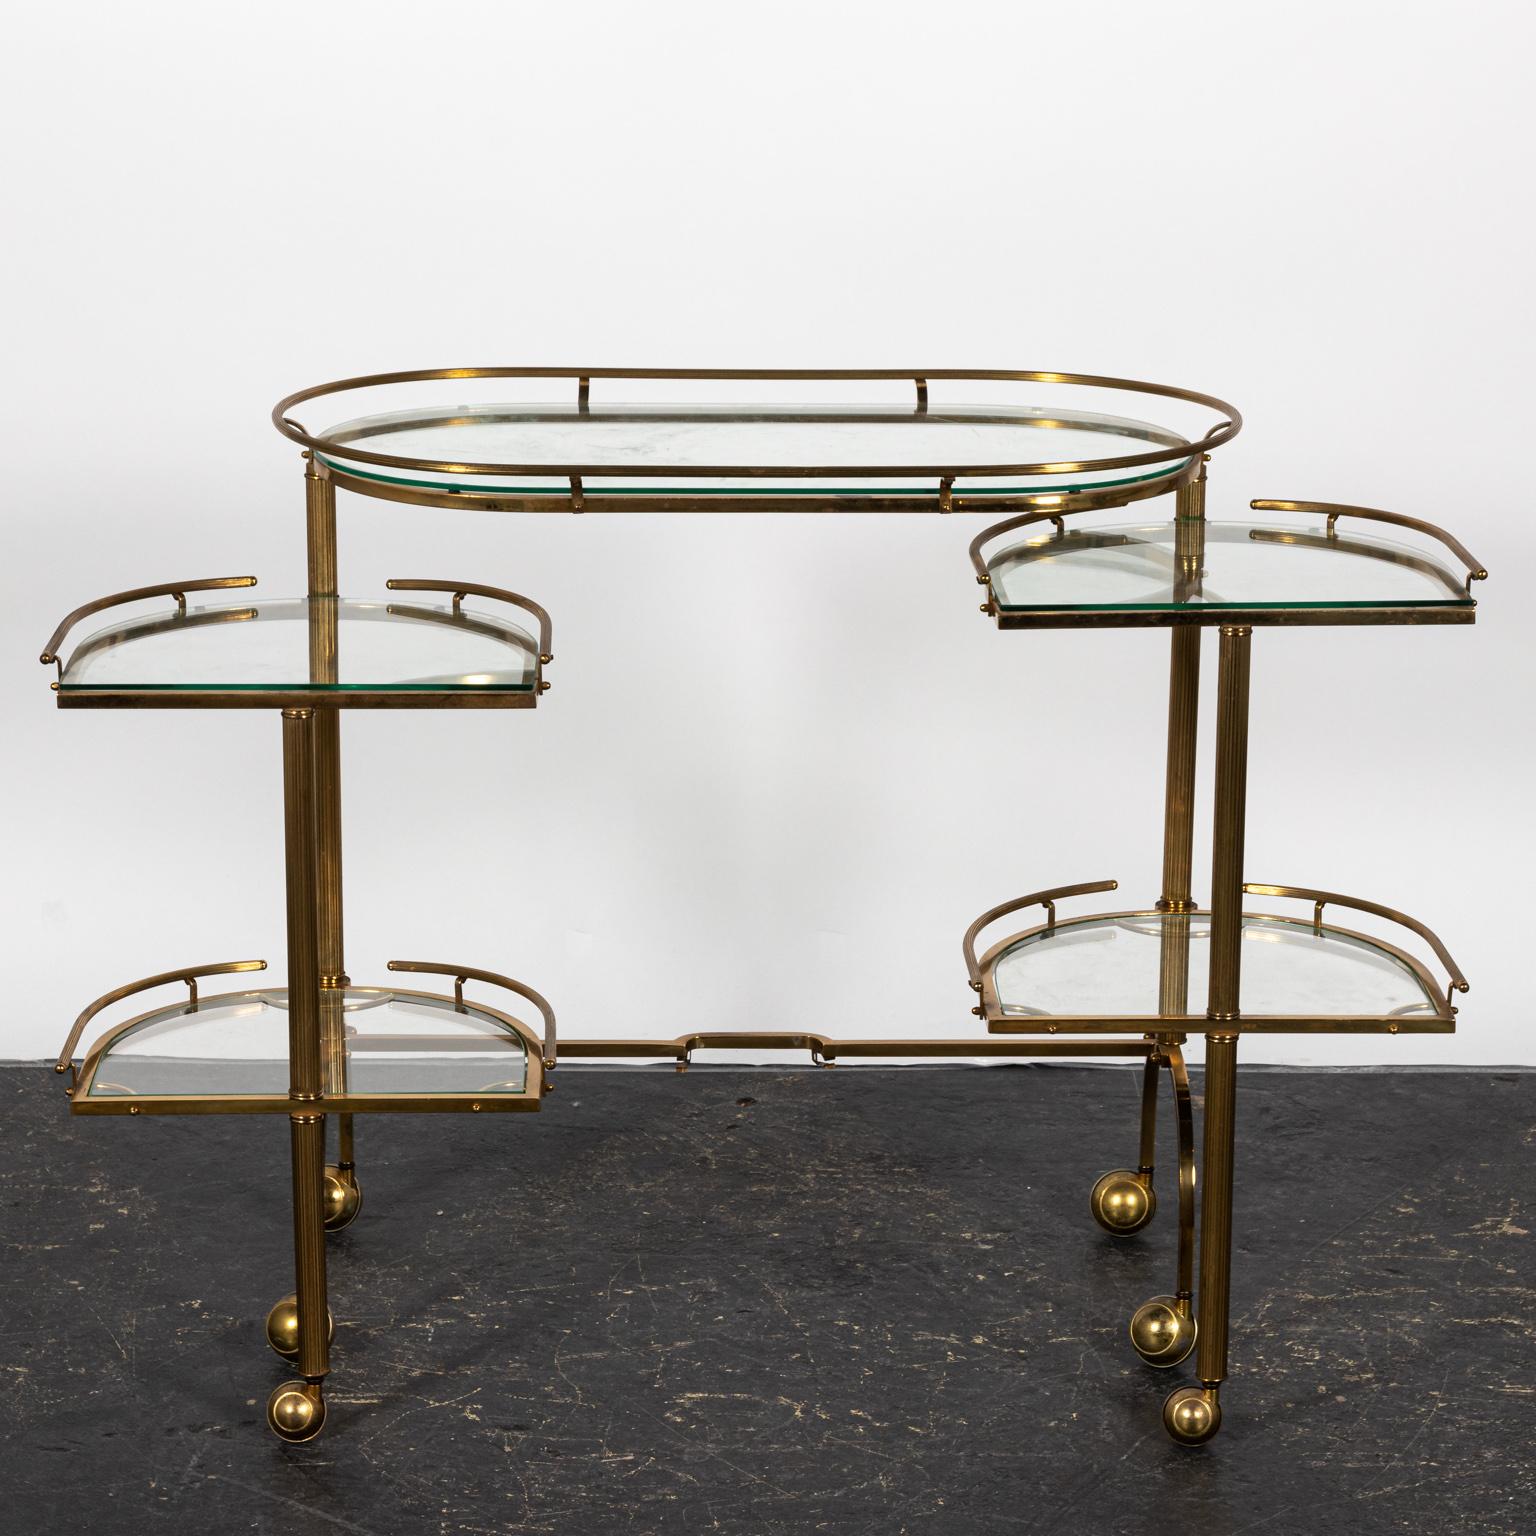 Brass and glass bar cart with movable sides that open up into additional shelves. Please note of wear consistent with age including patina and oxidation to the Brass frame.